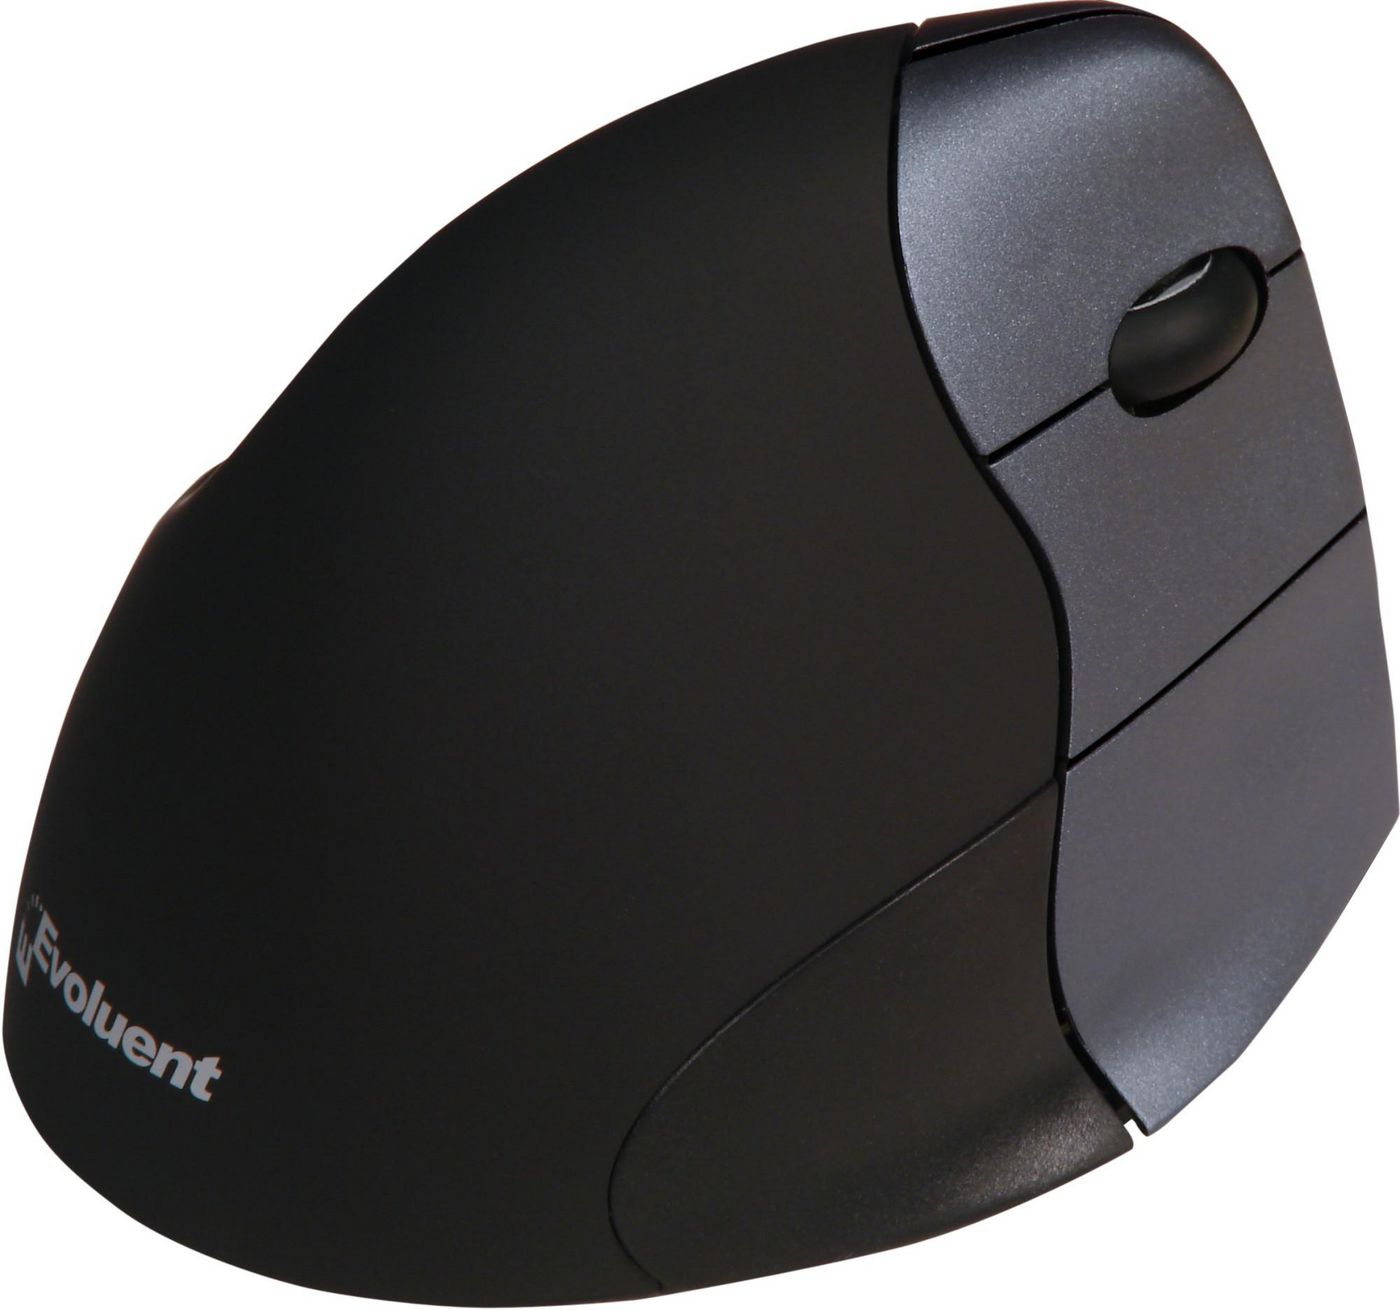 Evoluent 500788 Vertical Mouse4 WL Right hand 